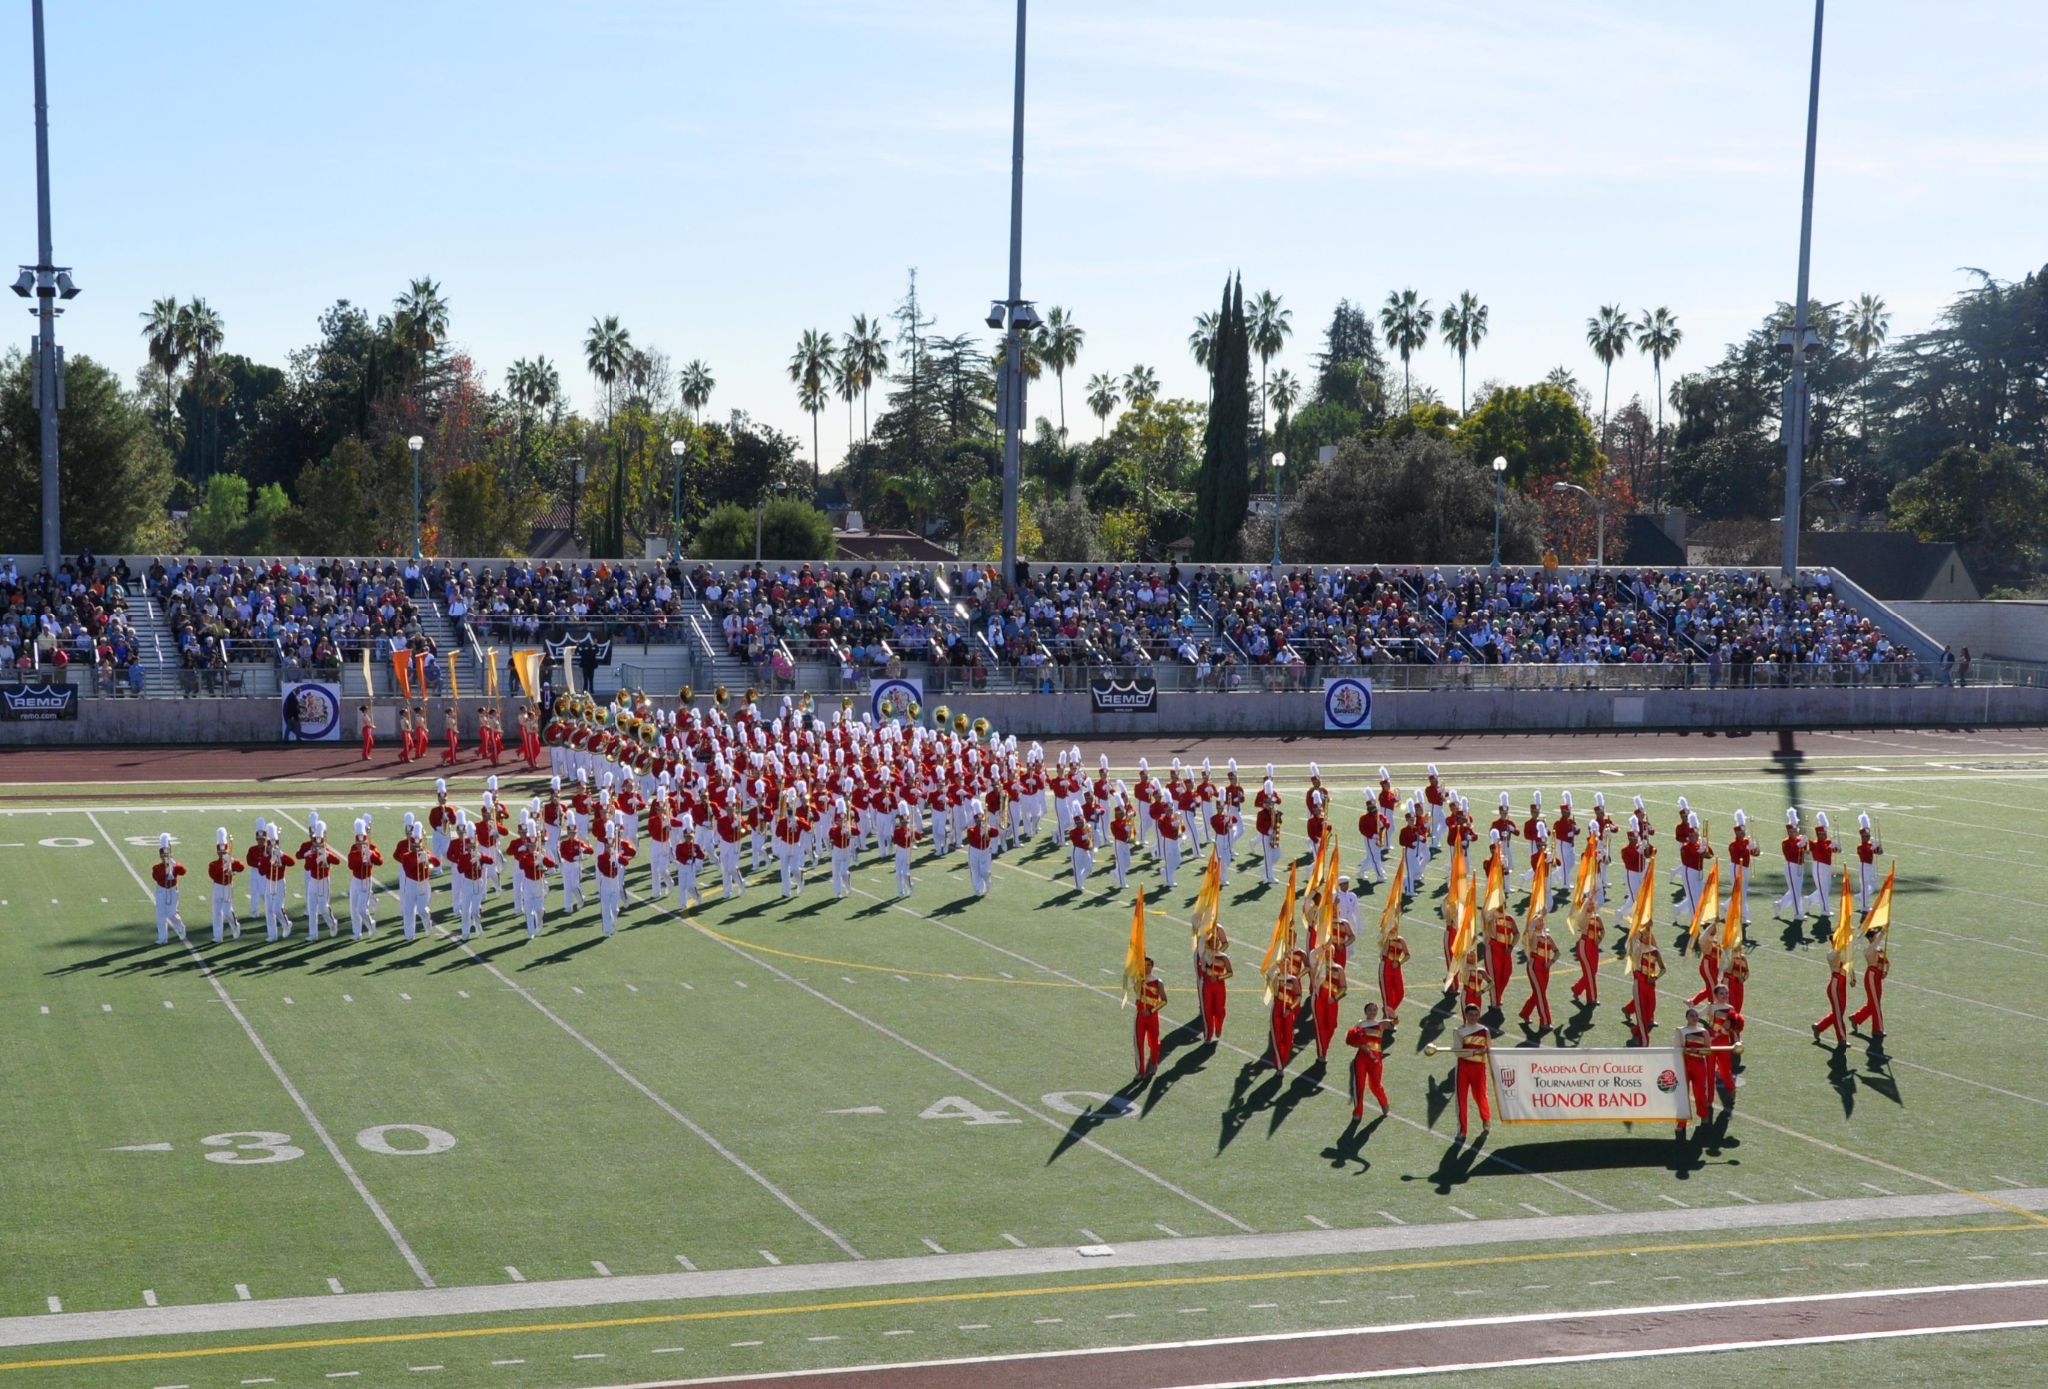 This band has participated in every Rose Parade since 1930.  It is composed of the Pasadena City College Lancer Marching Band plus exceptional school musicians from throughout Southern California.  Each year more than 600 students compete for the 200 band positions.